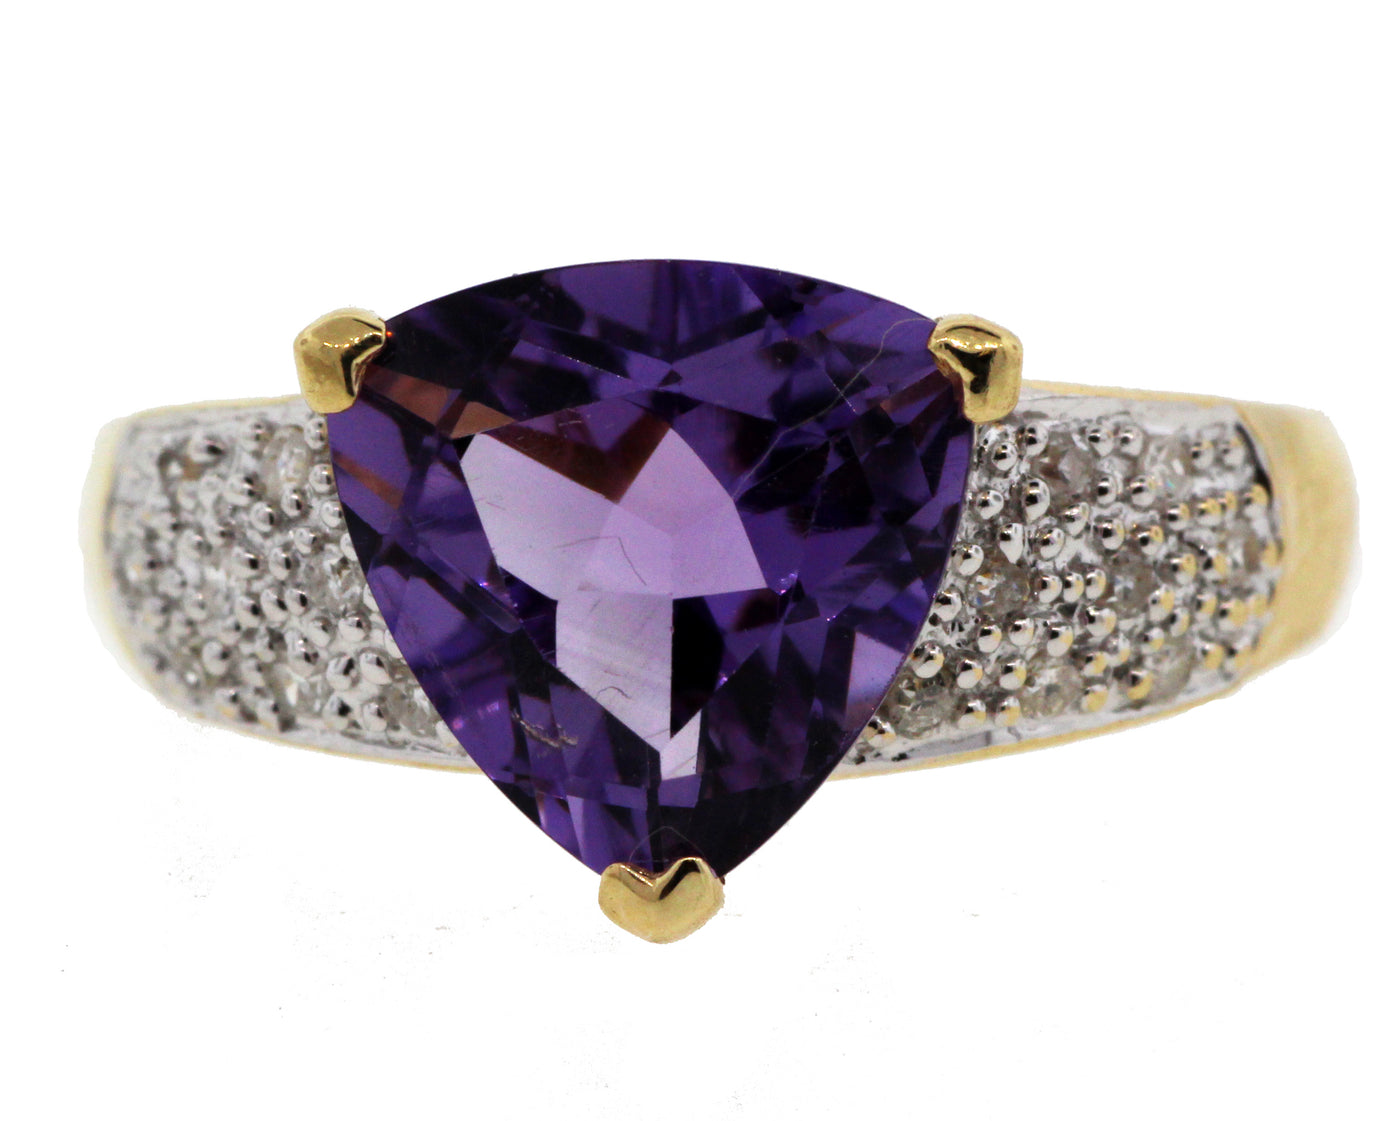 ESTATE 10KY AMETHYST AND DIAMOND RING .15CTTW